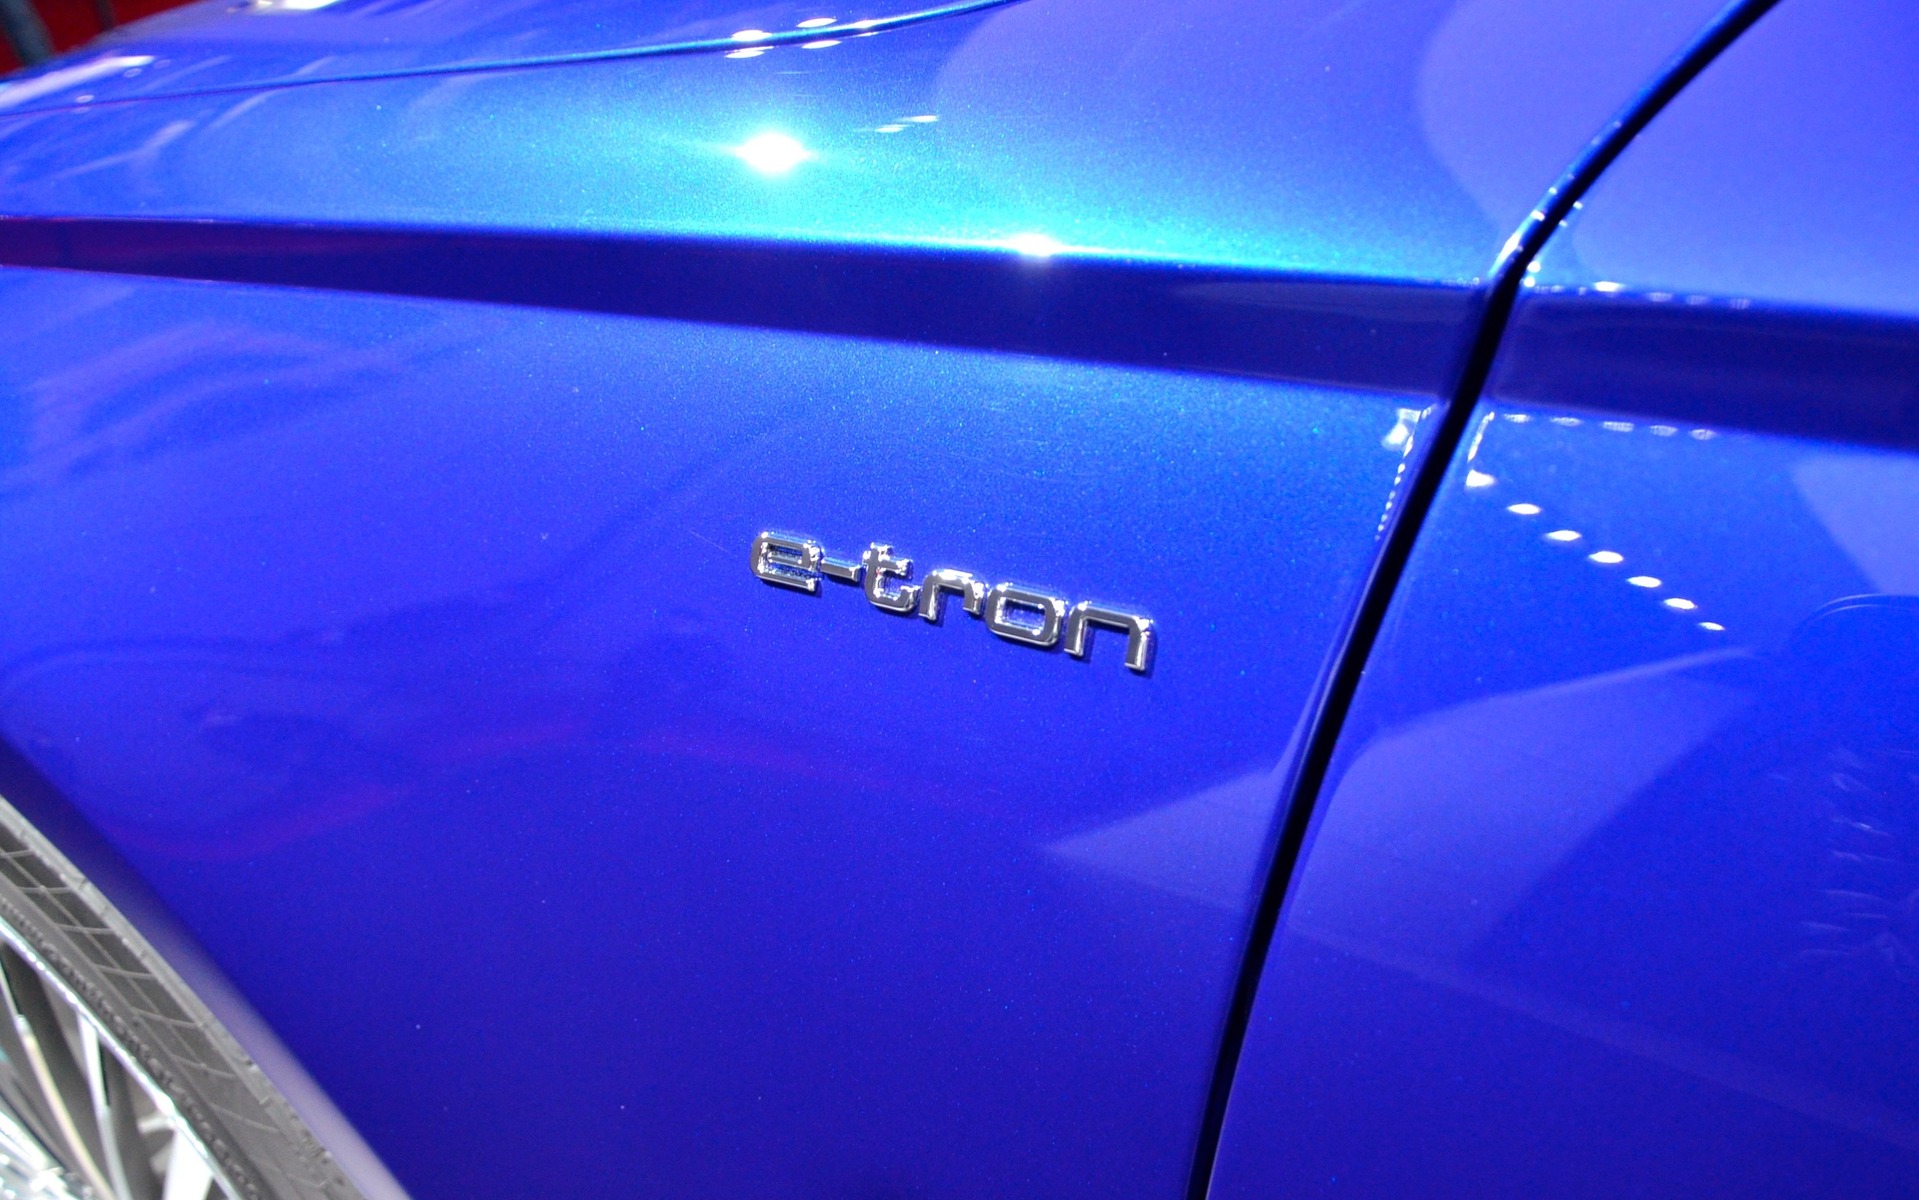 The e-tron emblem is seen on the front fenders.